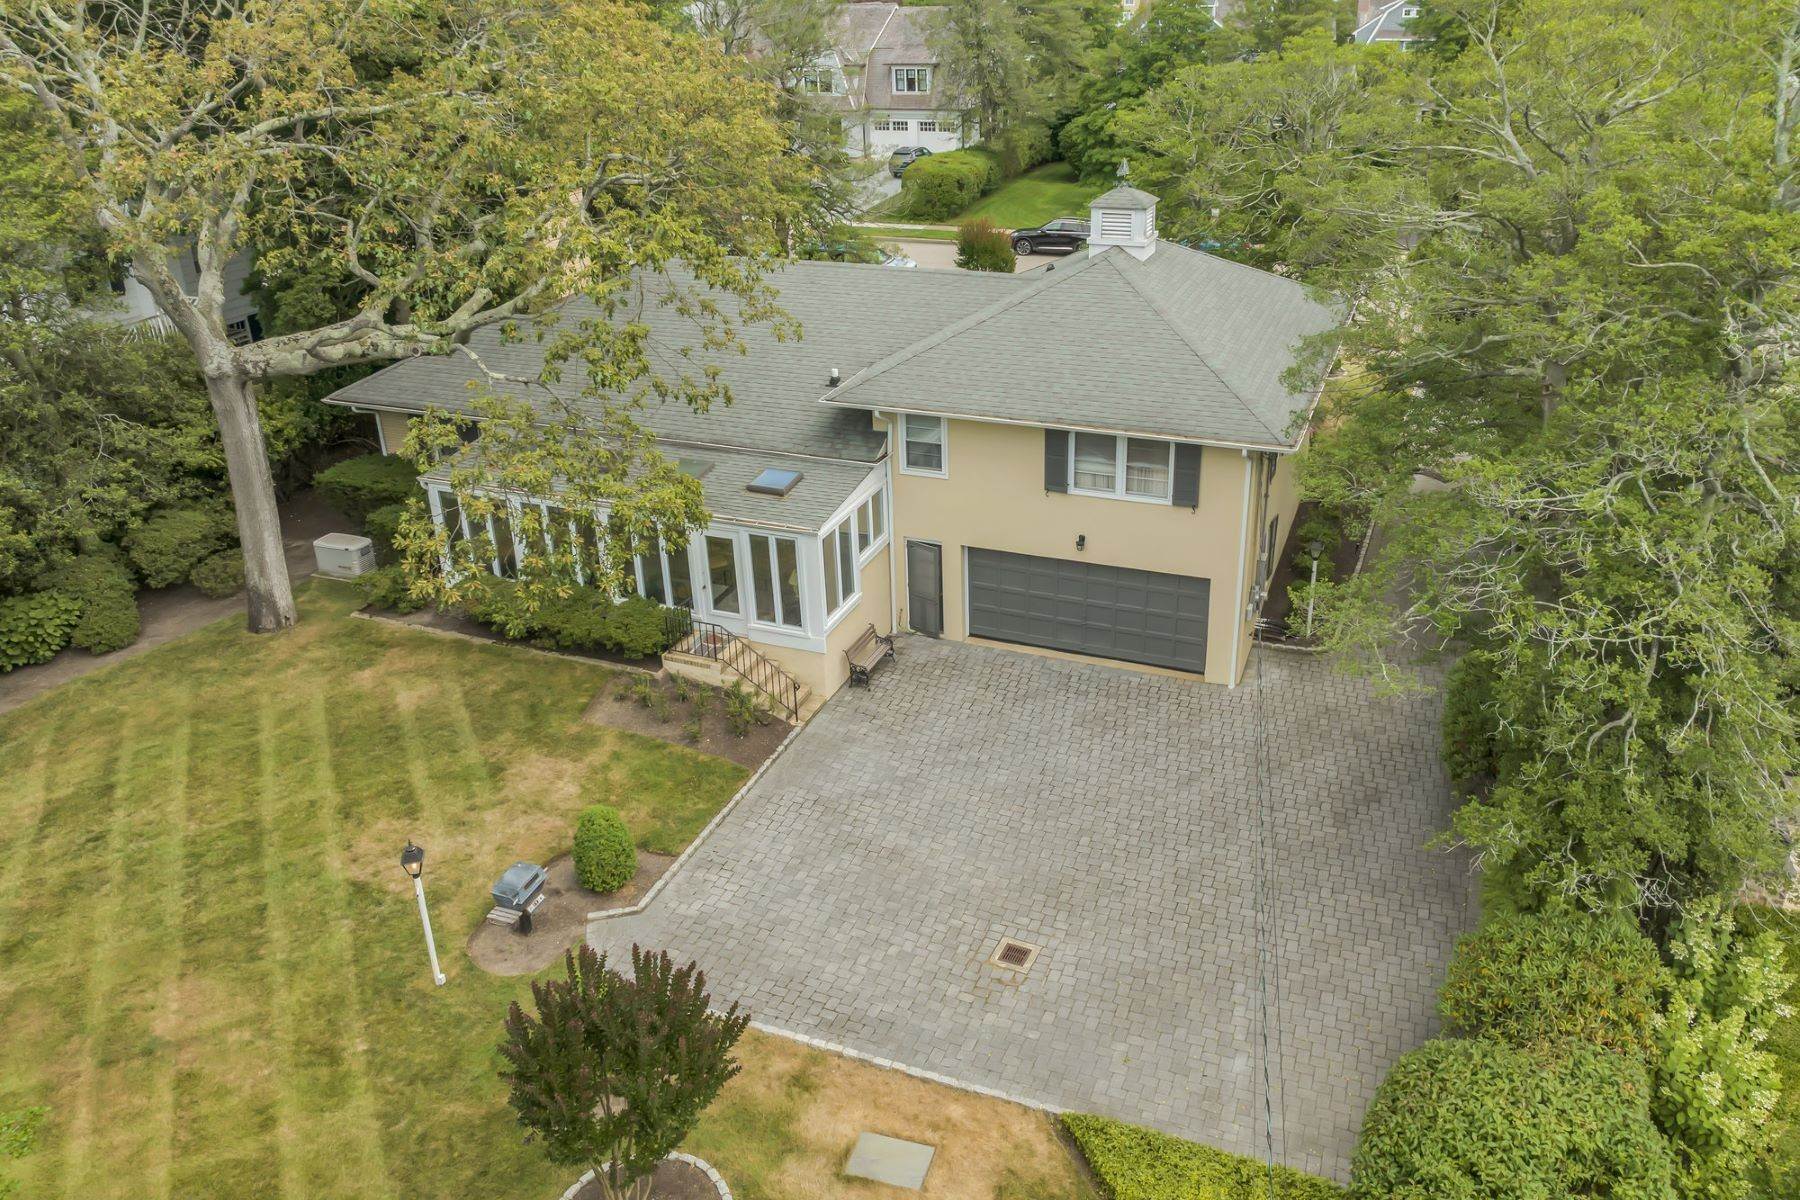 39. Single Family Homes for Sale at Build Your Dream Home or Renovate 206 Boston Boulevard Sea Girt, New Jersey 08750 United States